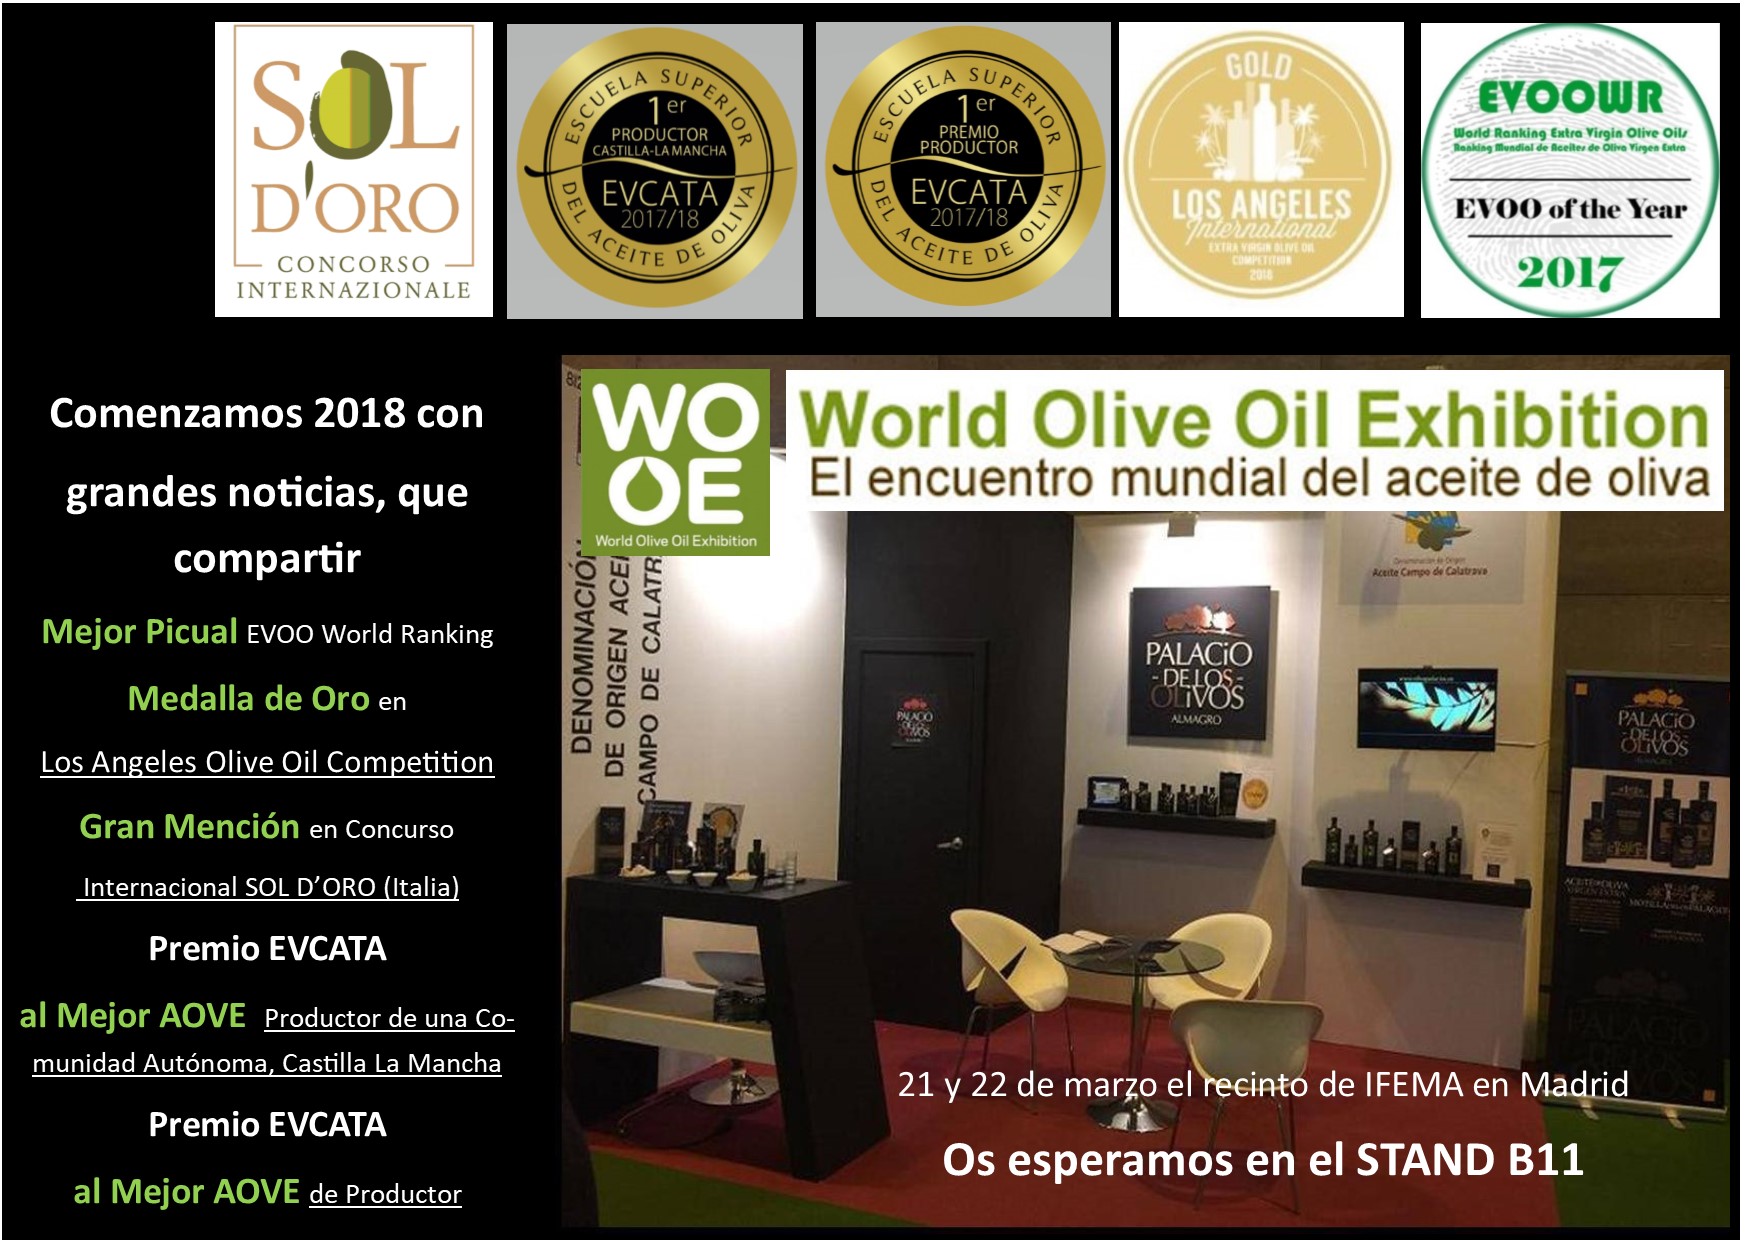 World Olive Oil Exhibition 2018 – stand B11